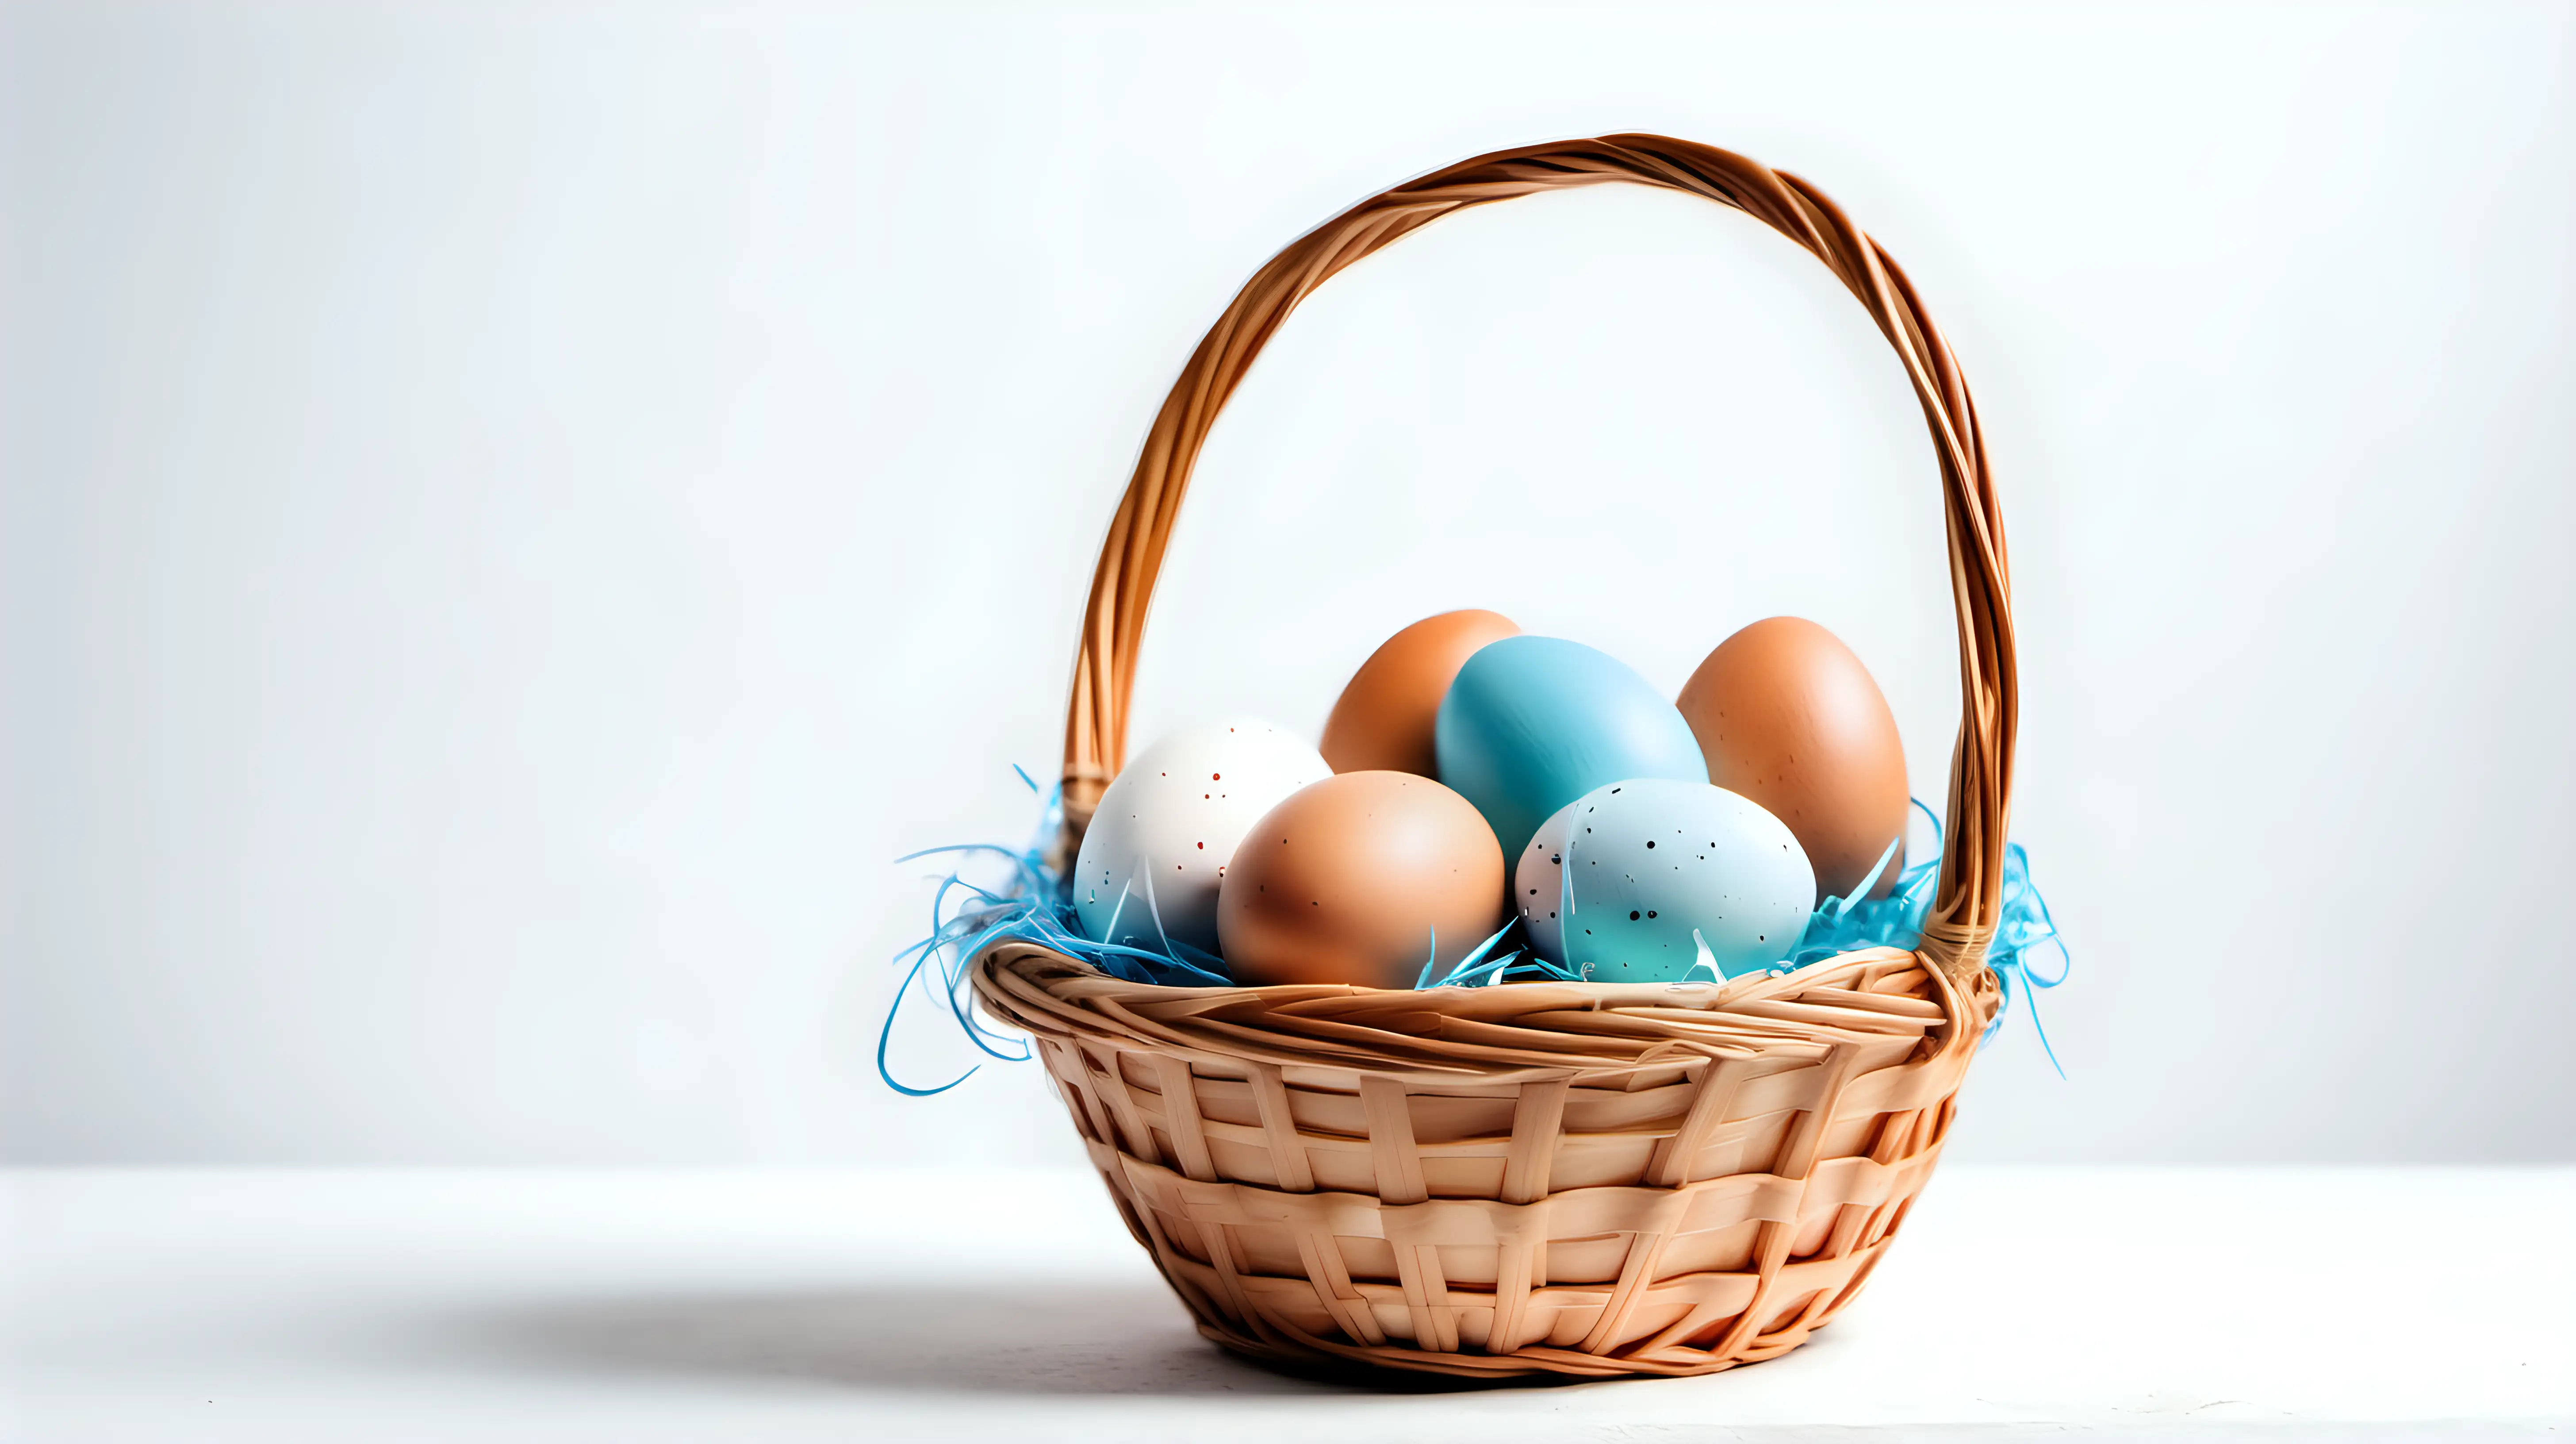 Easter day, egg in basket with white background, copy space

